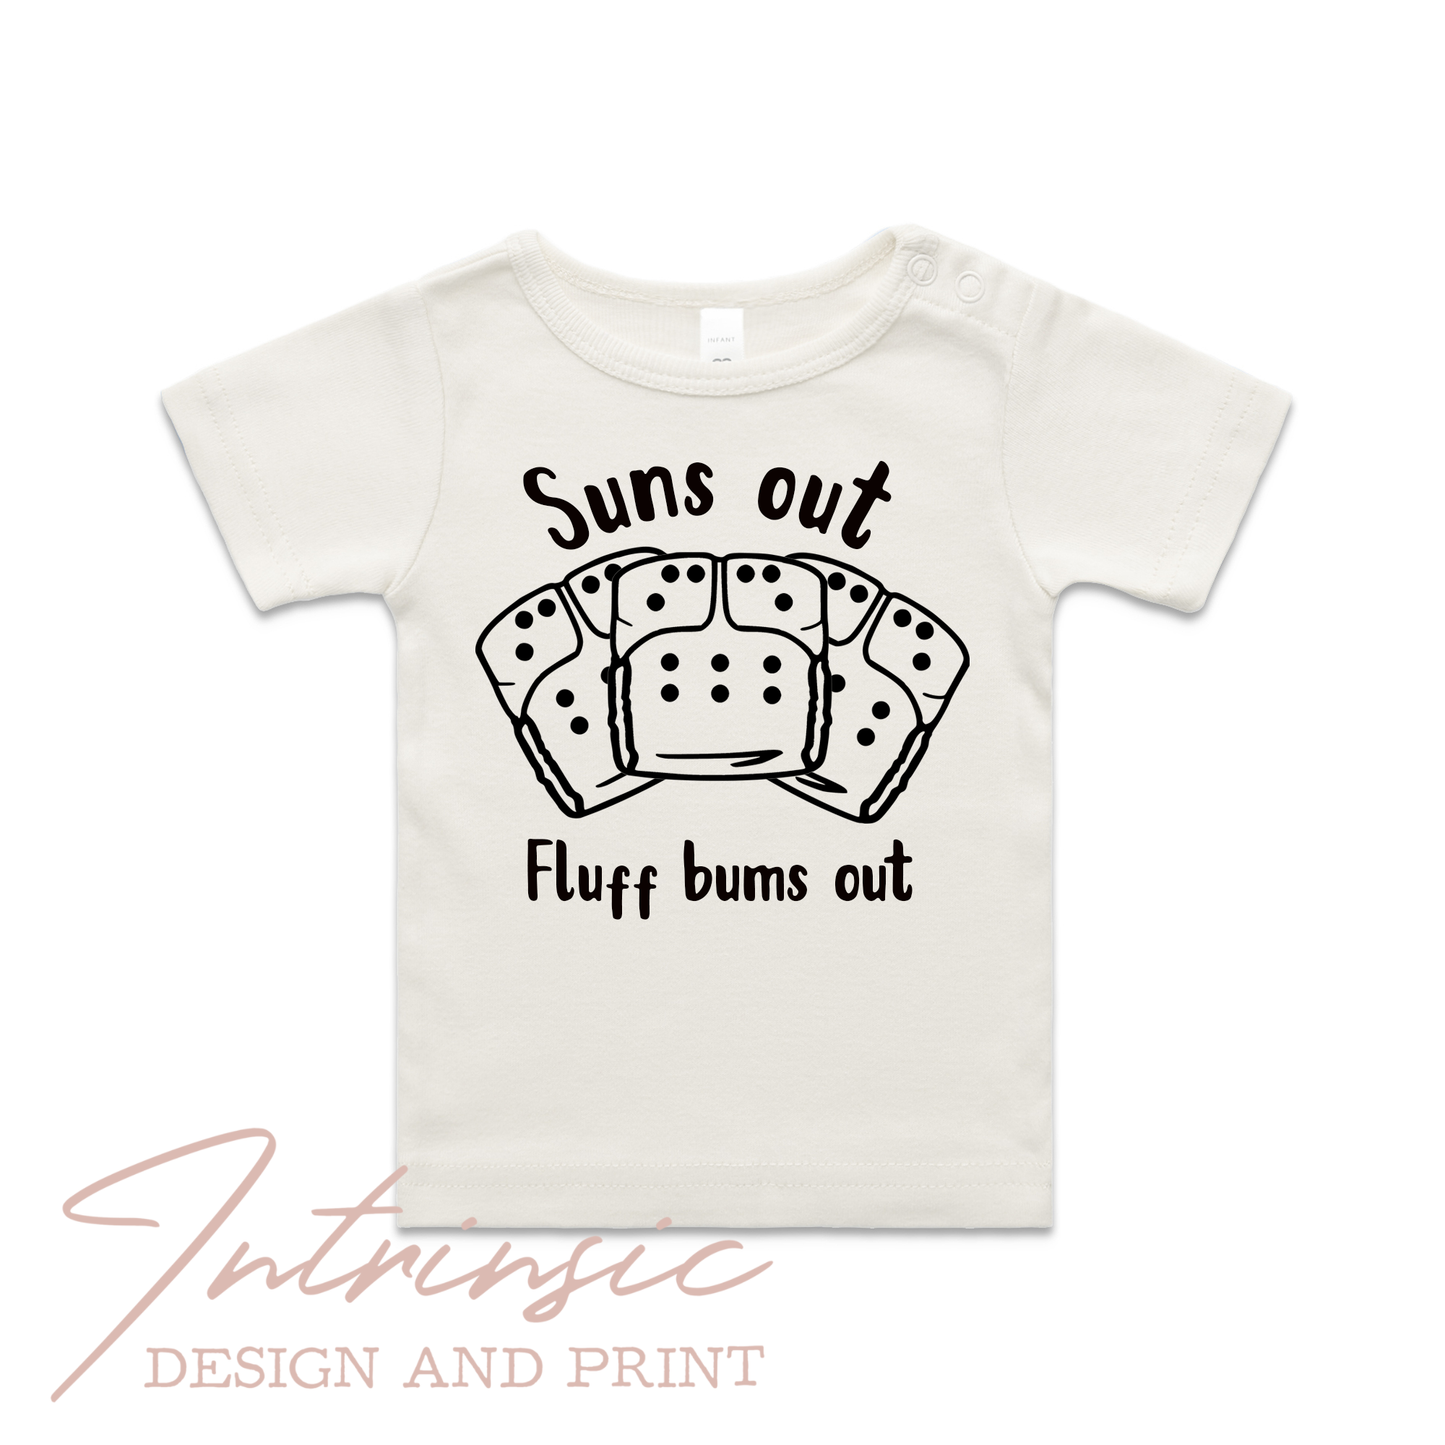 Fluff bums out - outline tee